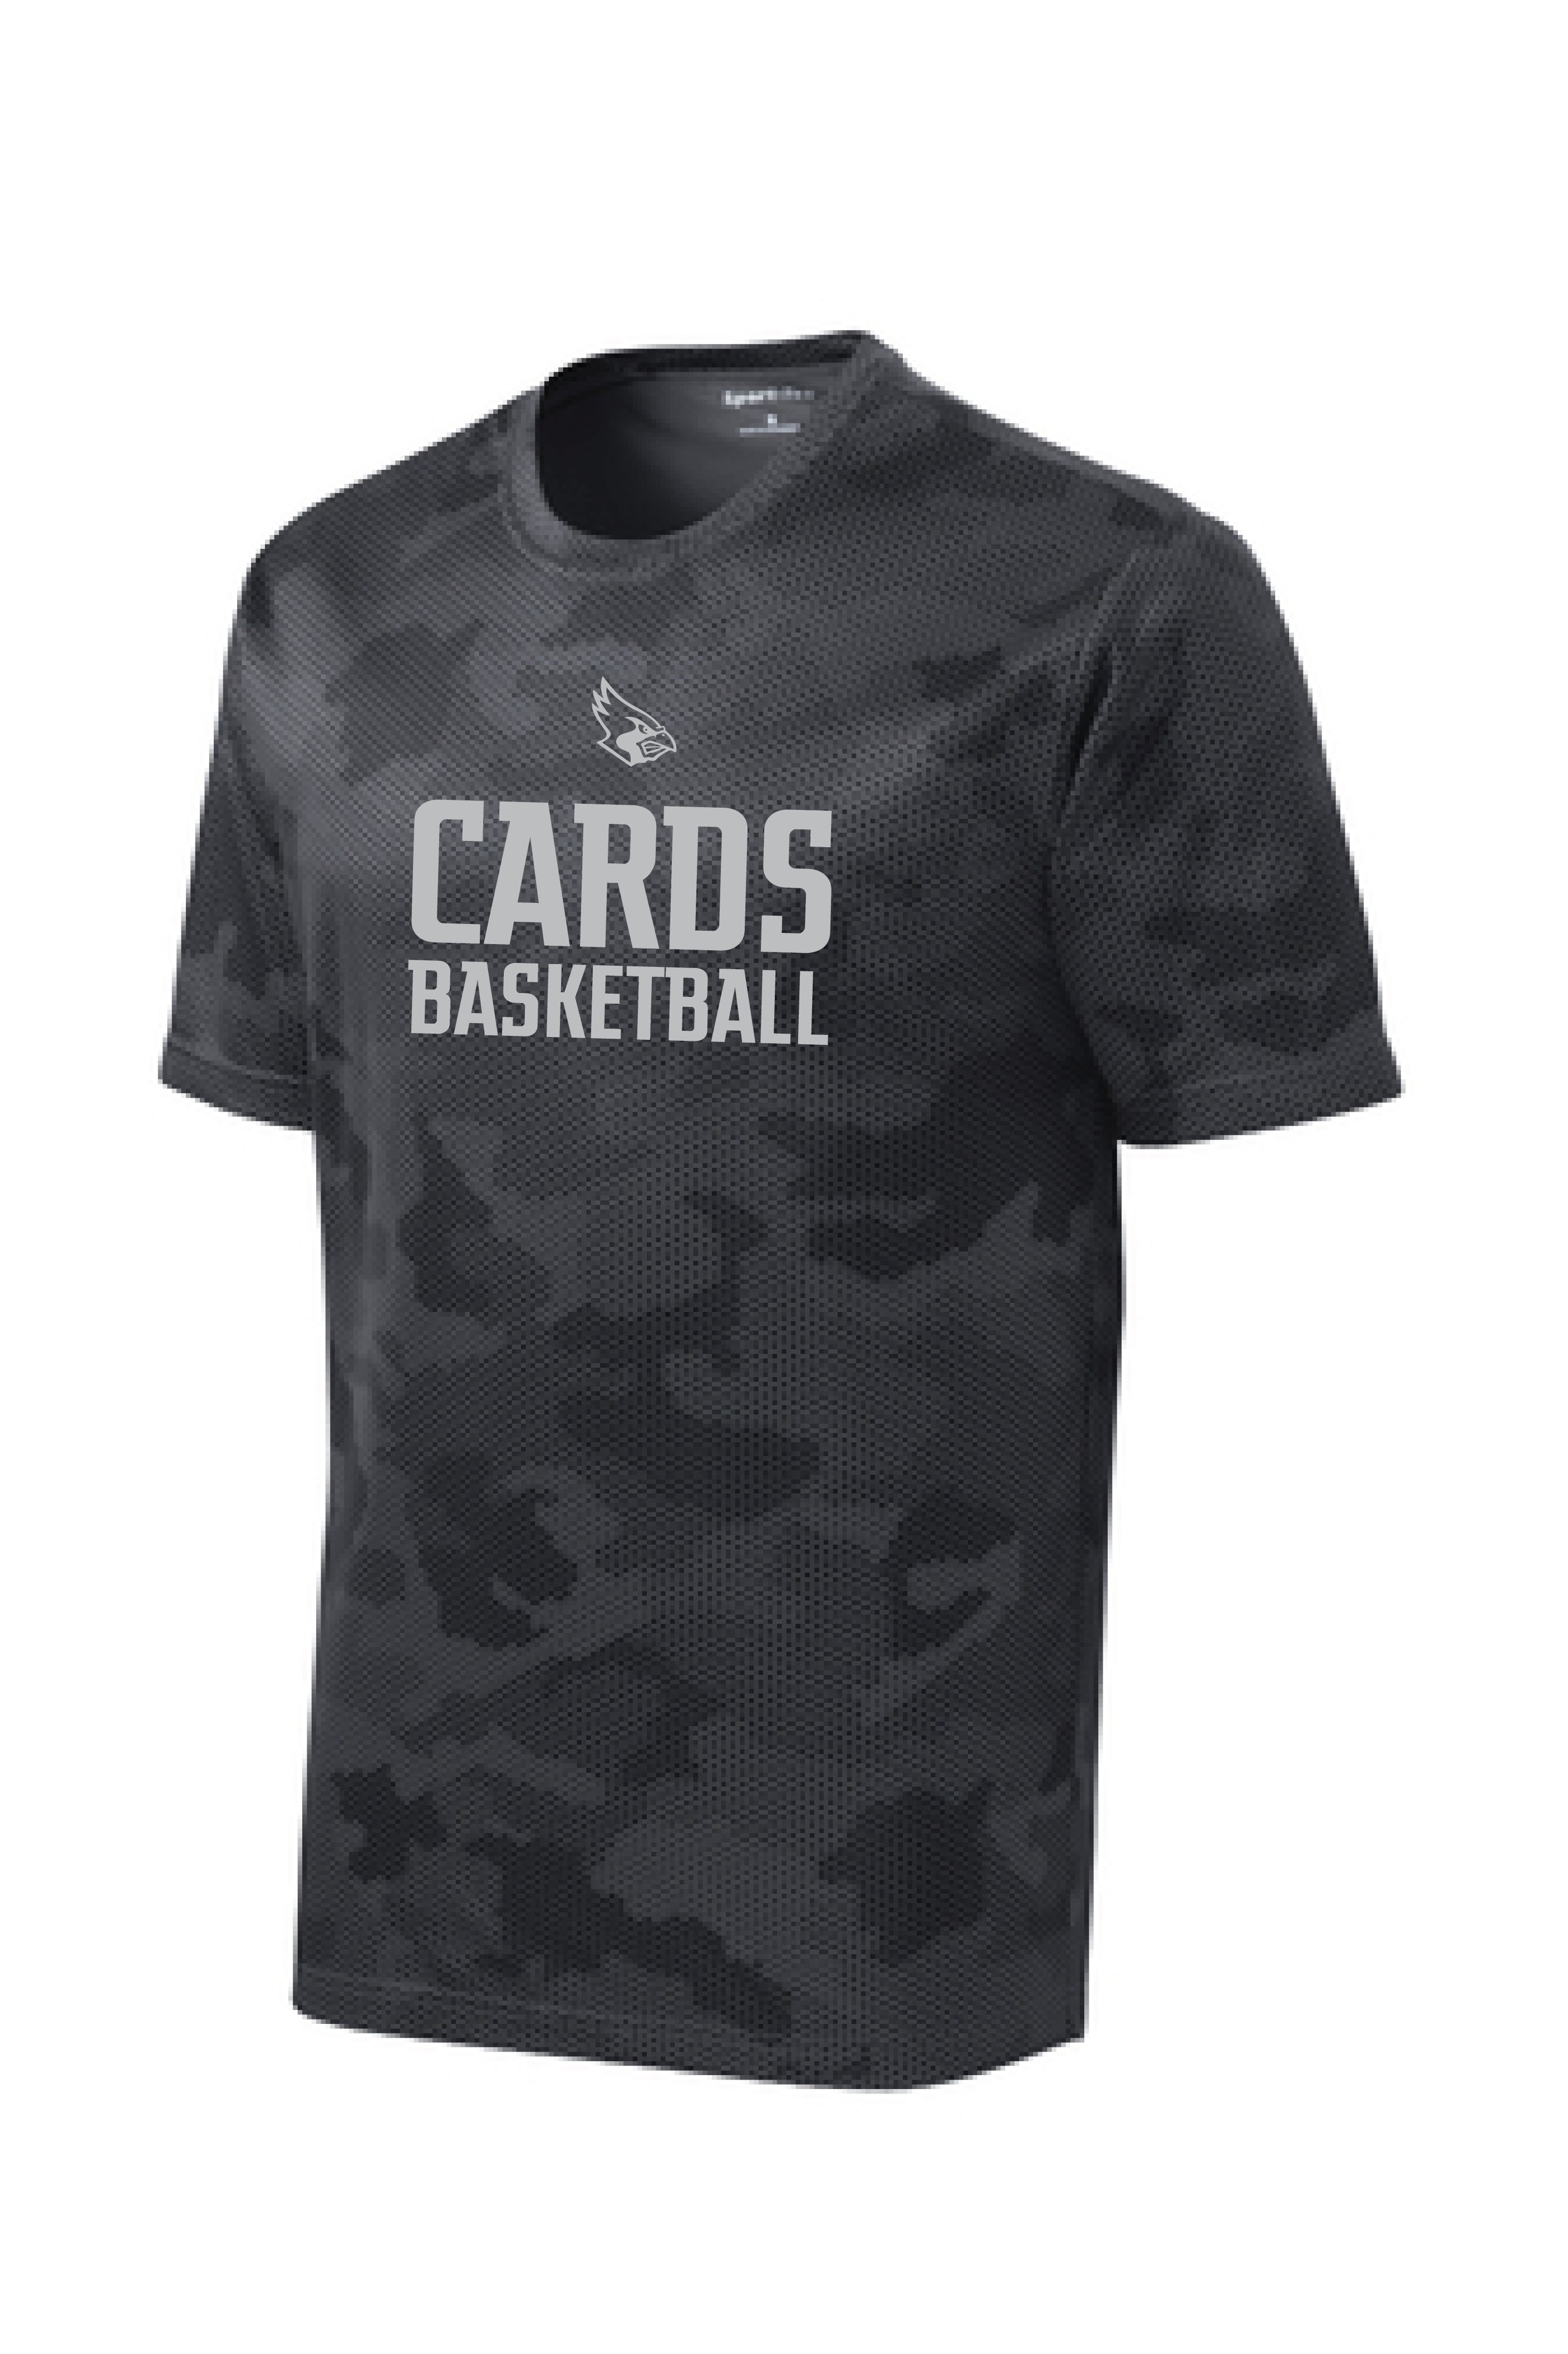 Cards Basketball Camo T-Shirt Youth